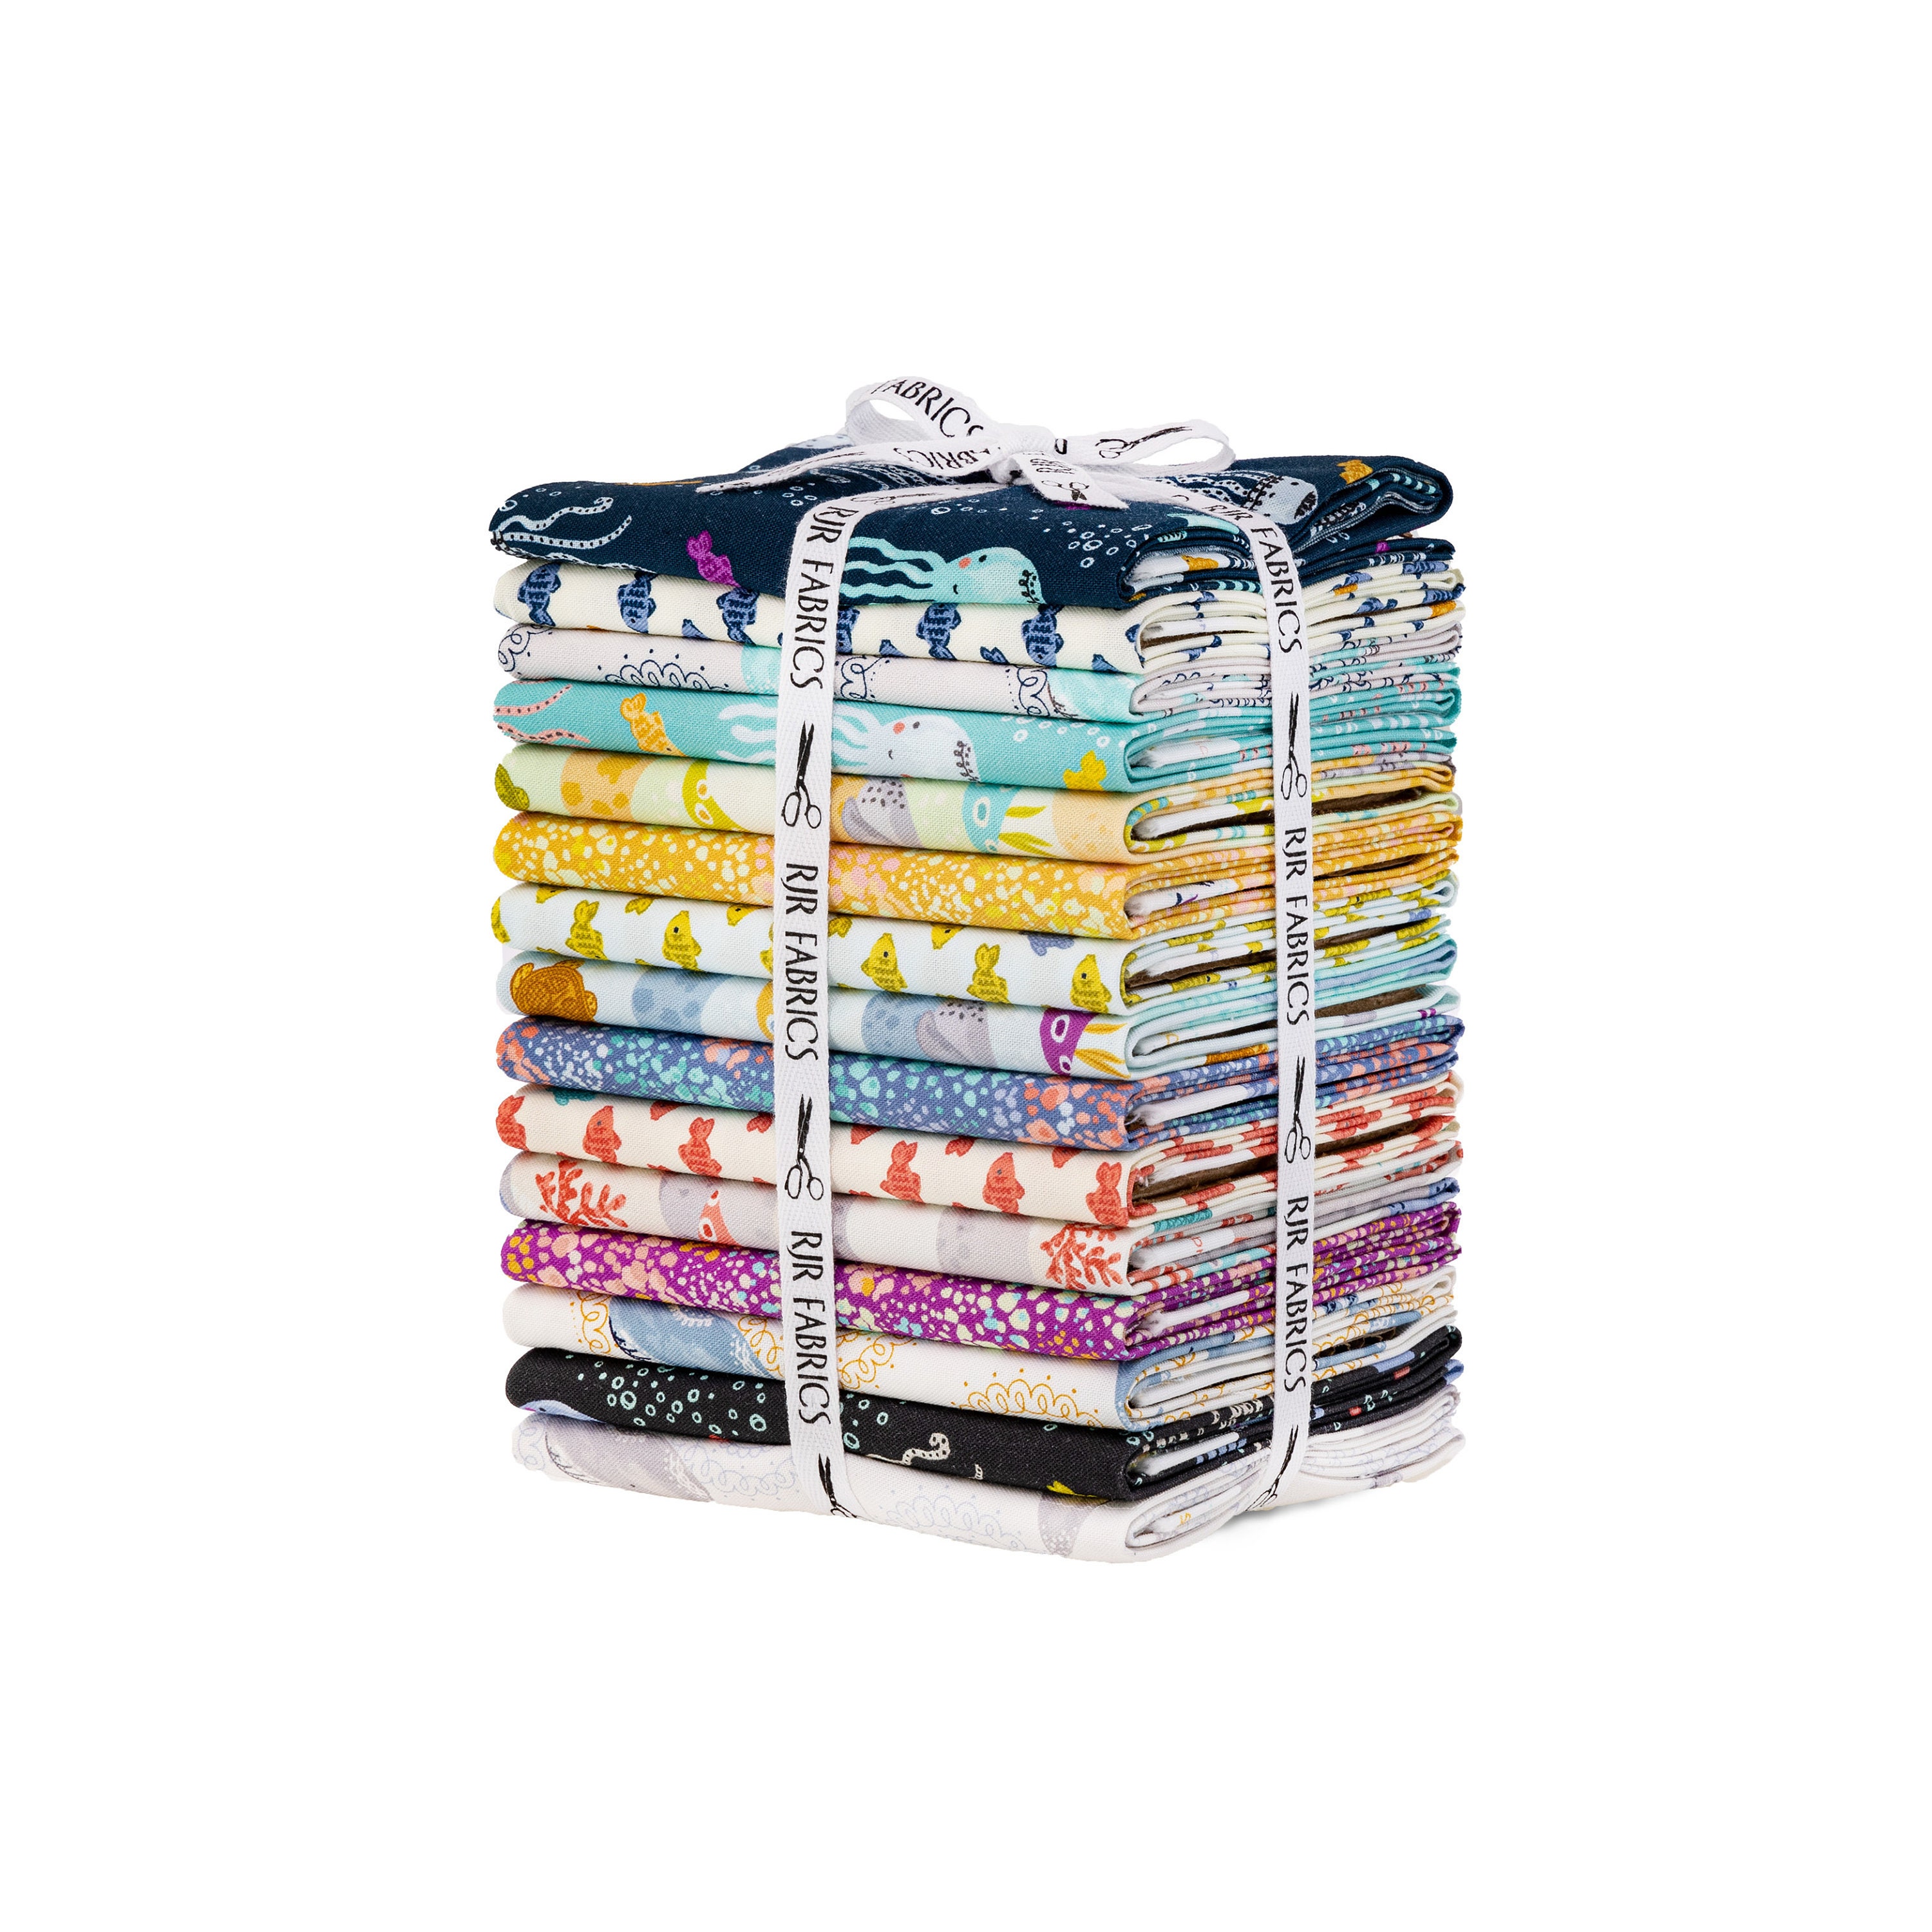 Sewcialites Fat Quarter Bundle in Thrive Edition Curated by Brooke